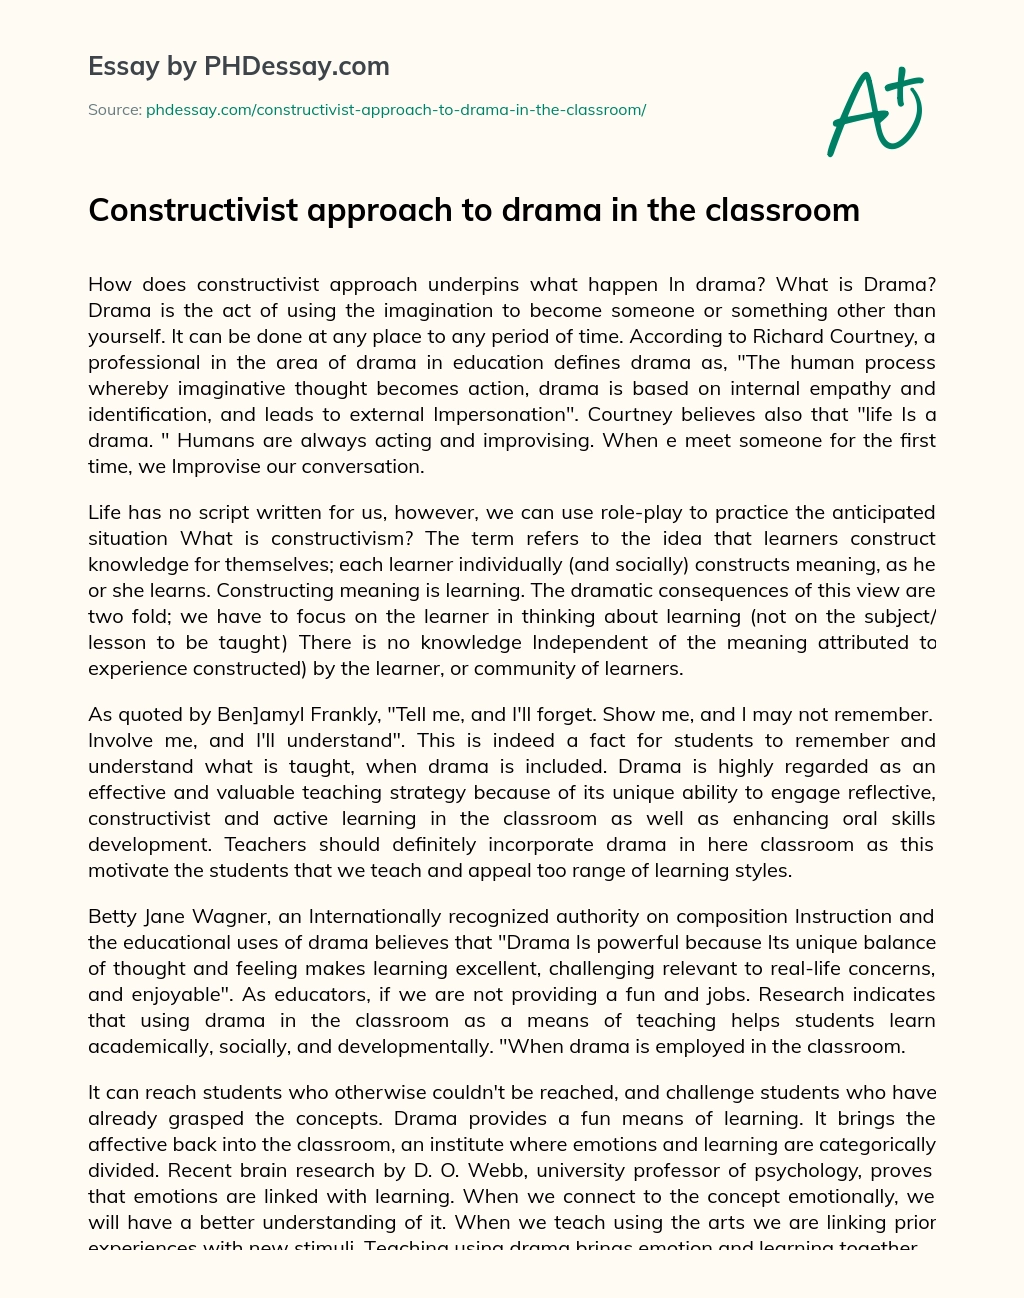 Constructivist approach to drama in the classroom essay